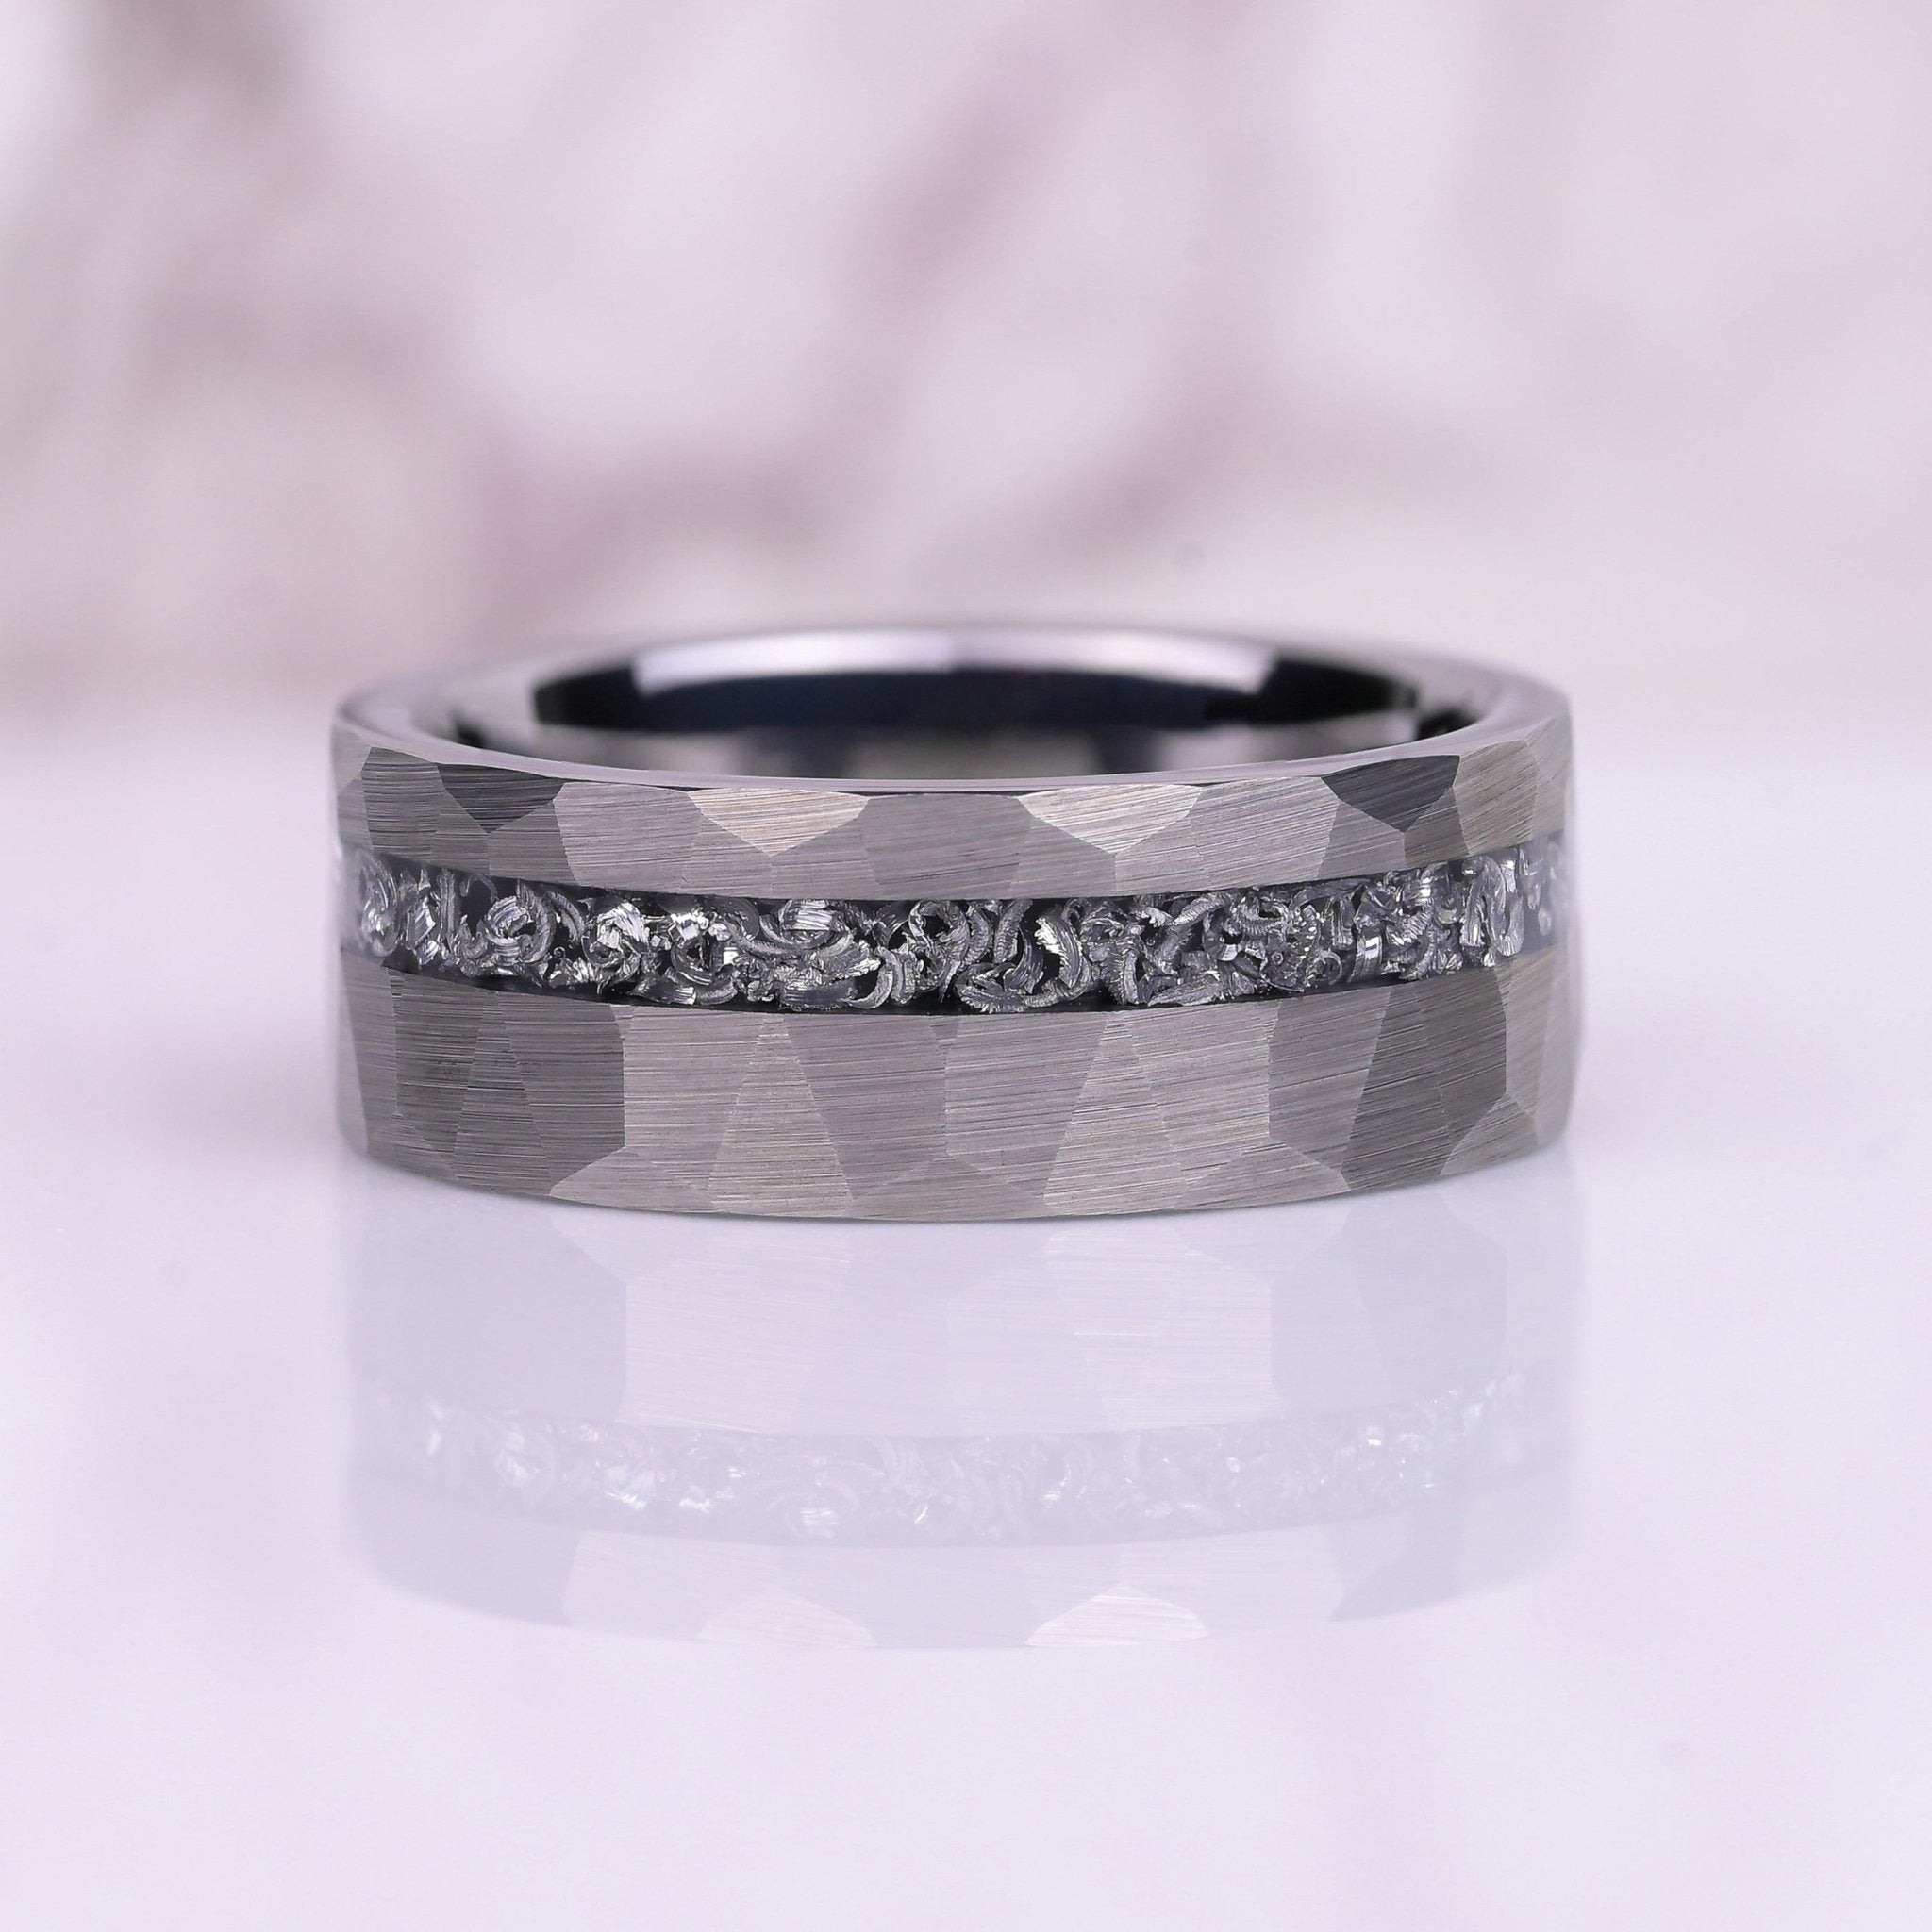 The Blacksmith - Mens Wedding Band - Silver Hammered Tungsten Ring - Meteorite Inlay | Monetto Bands